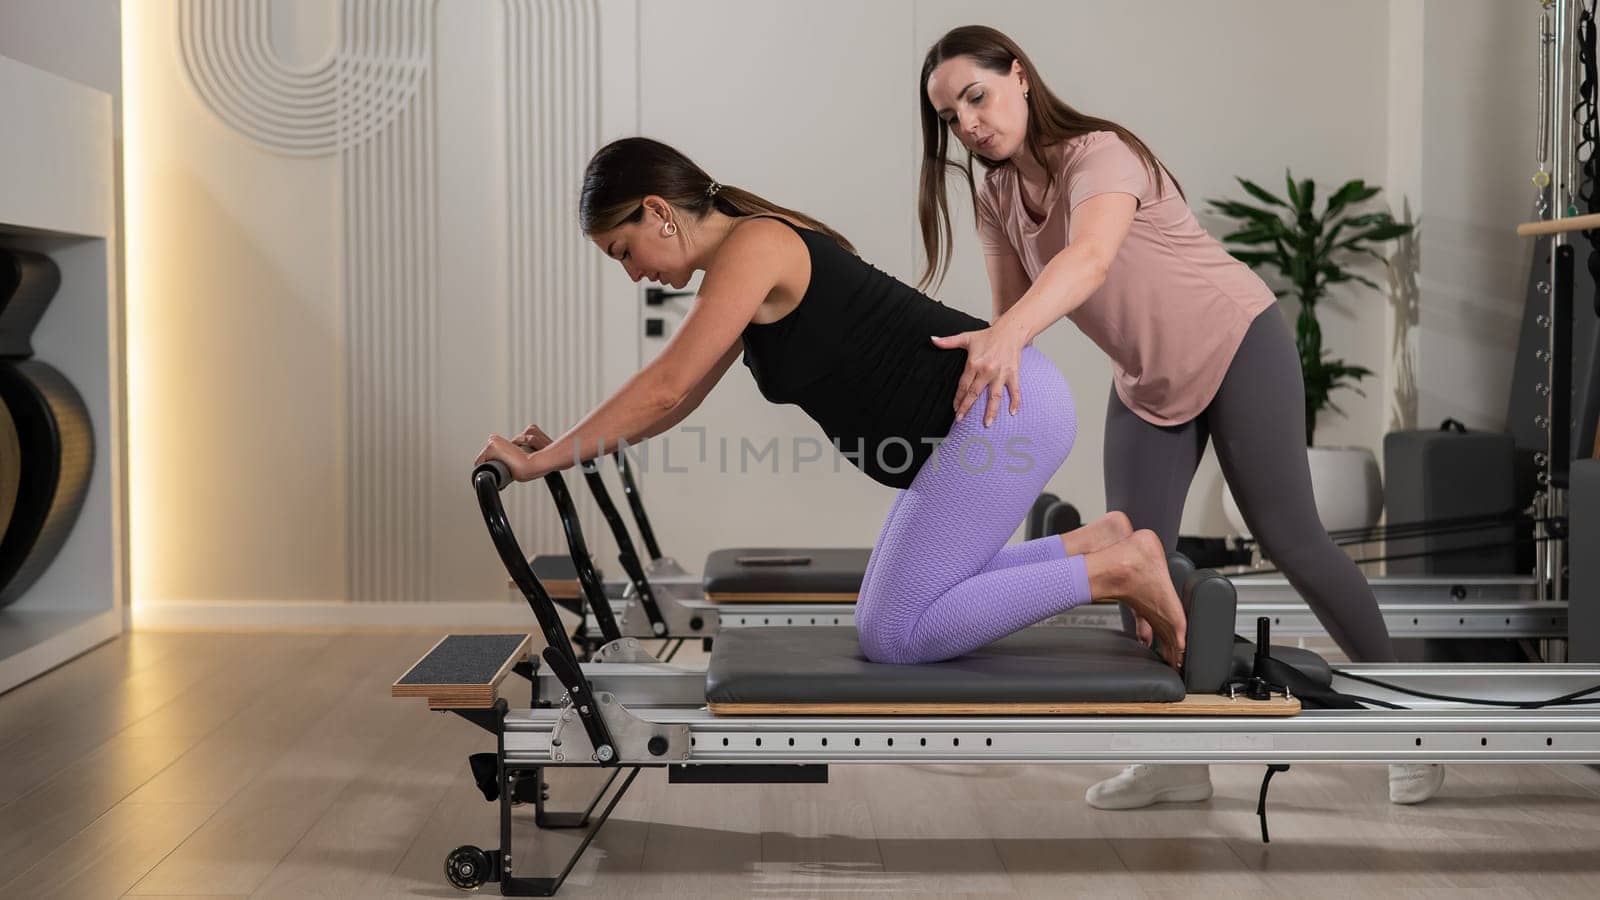 A pregnant woman works out on a reformer exercise machine with a personal trainer